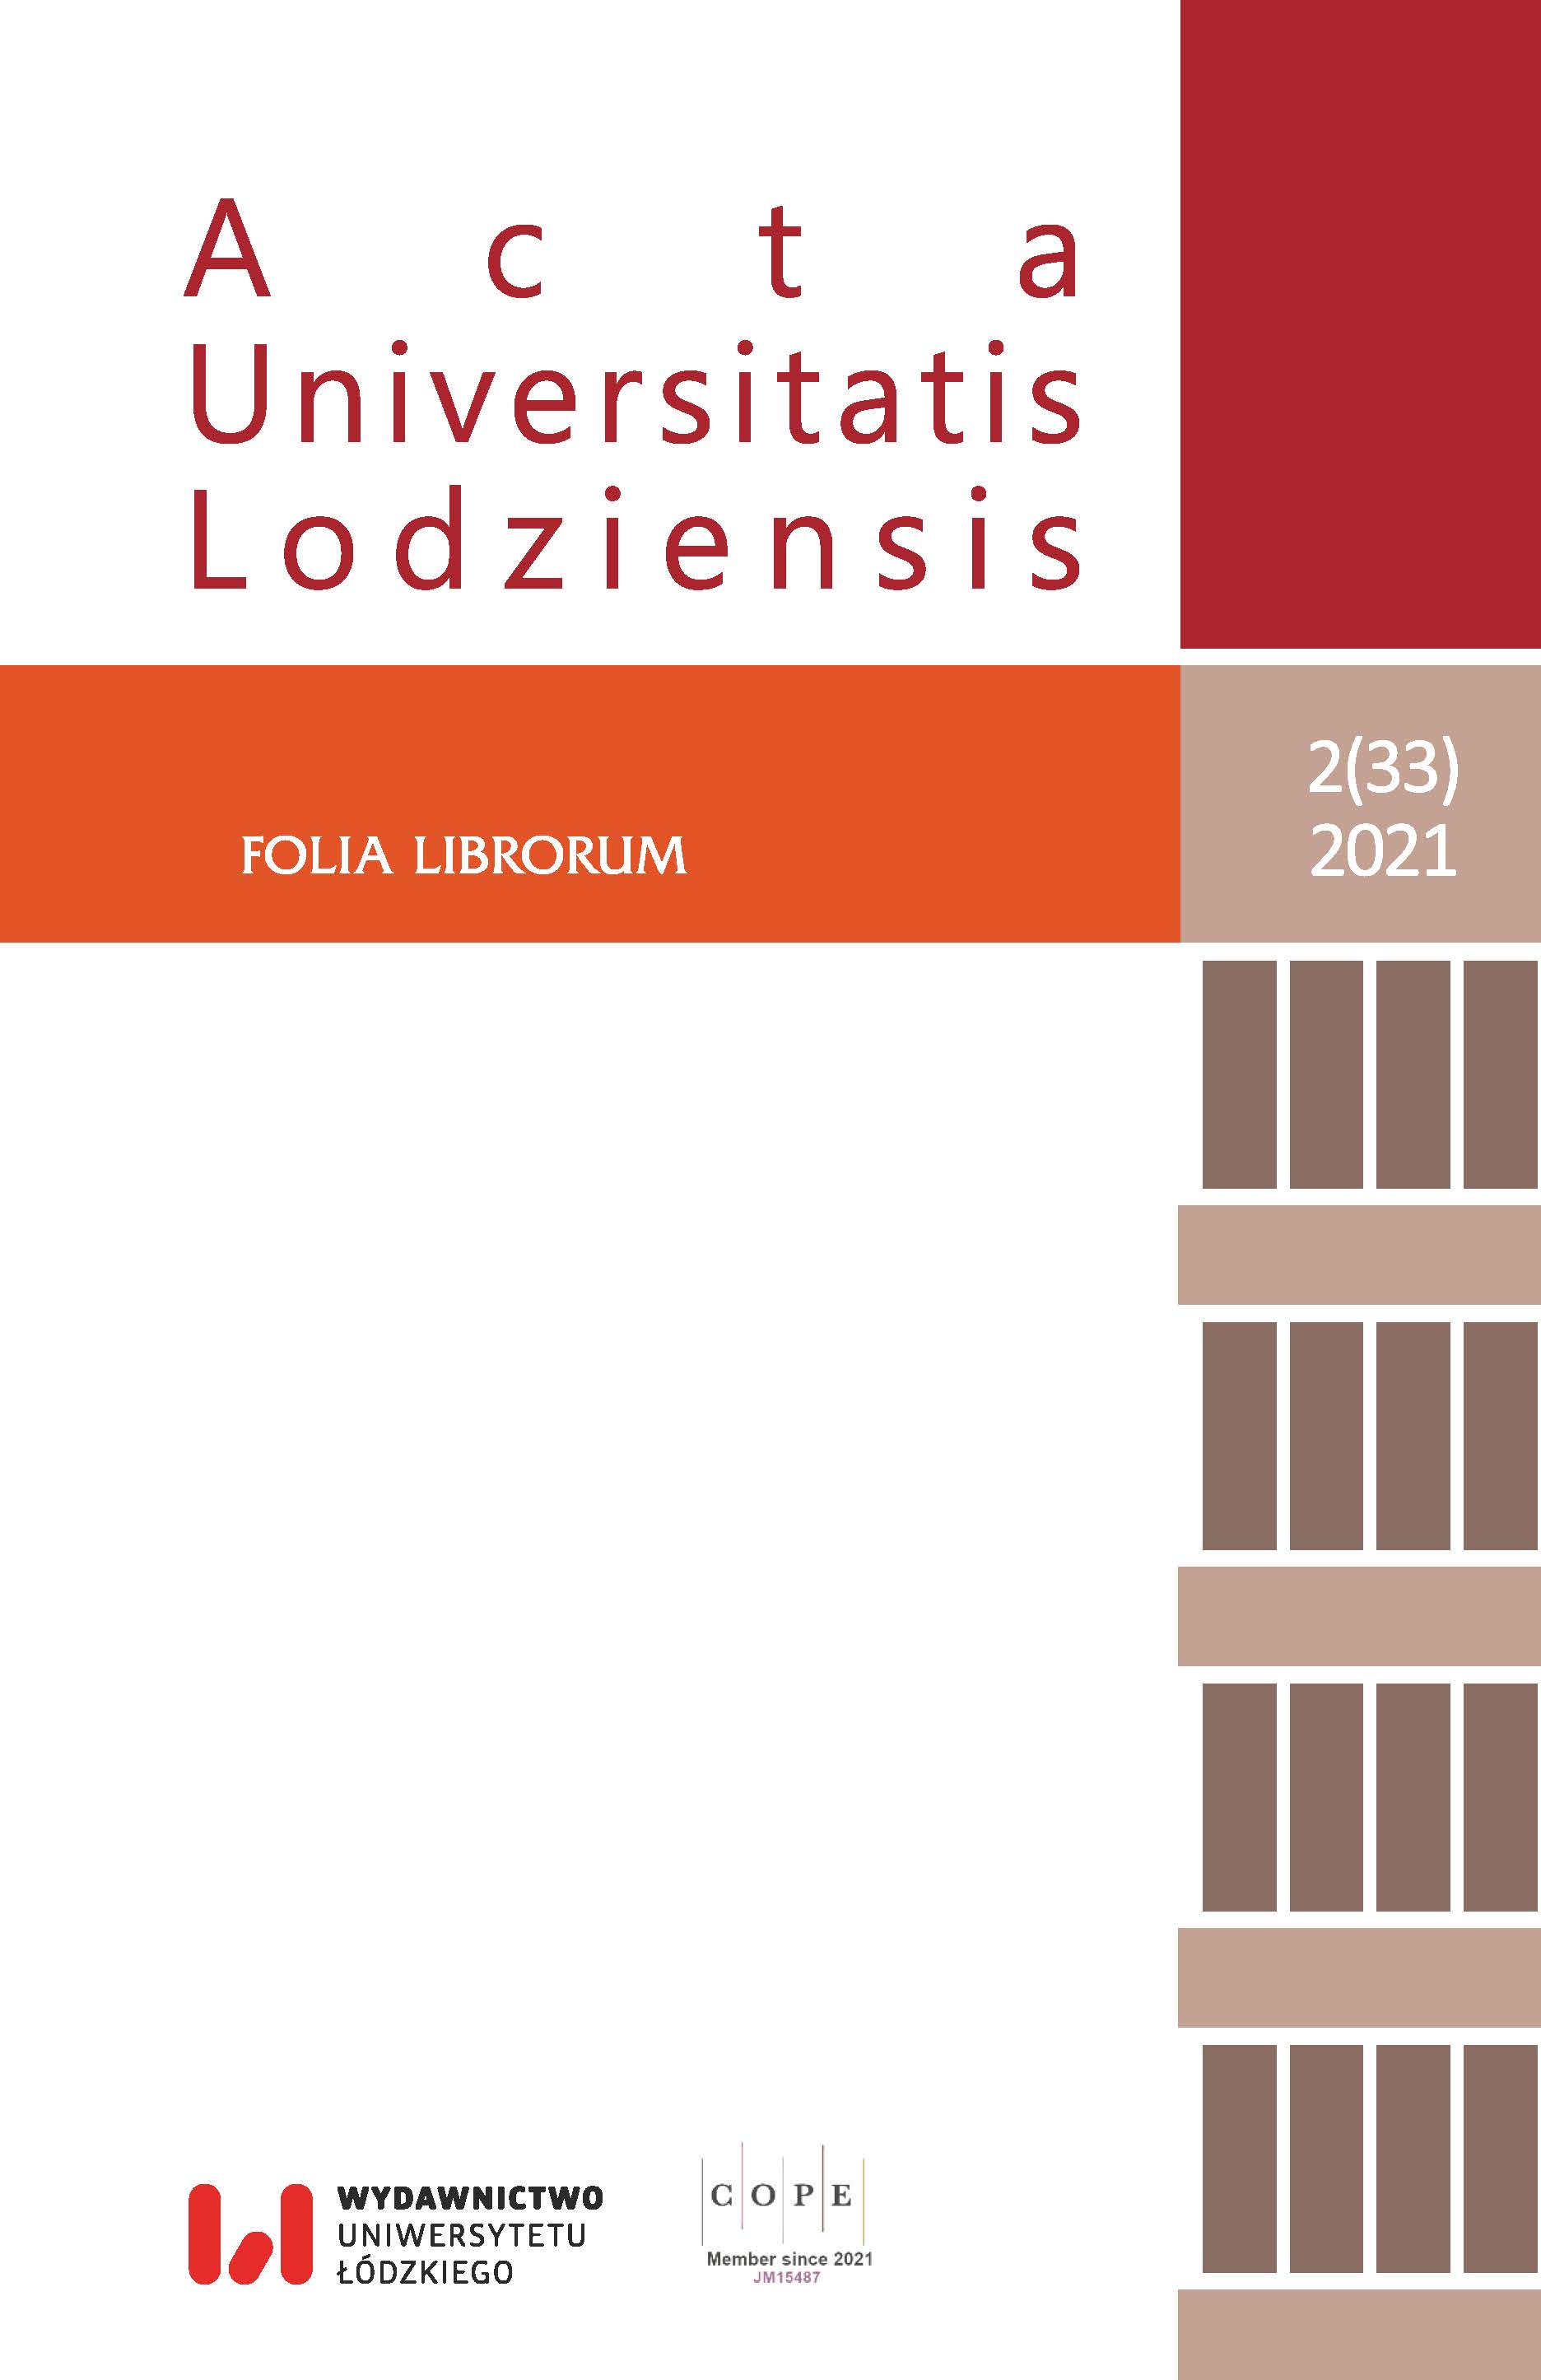 Activities of the Pedagogical Regional Library of prof. Tadeusz Kotarbiński in Łódź during the pandemic Cover Image